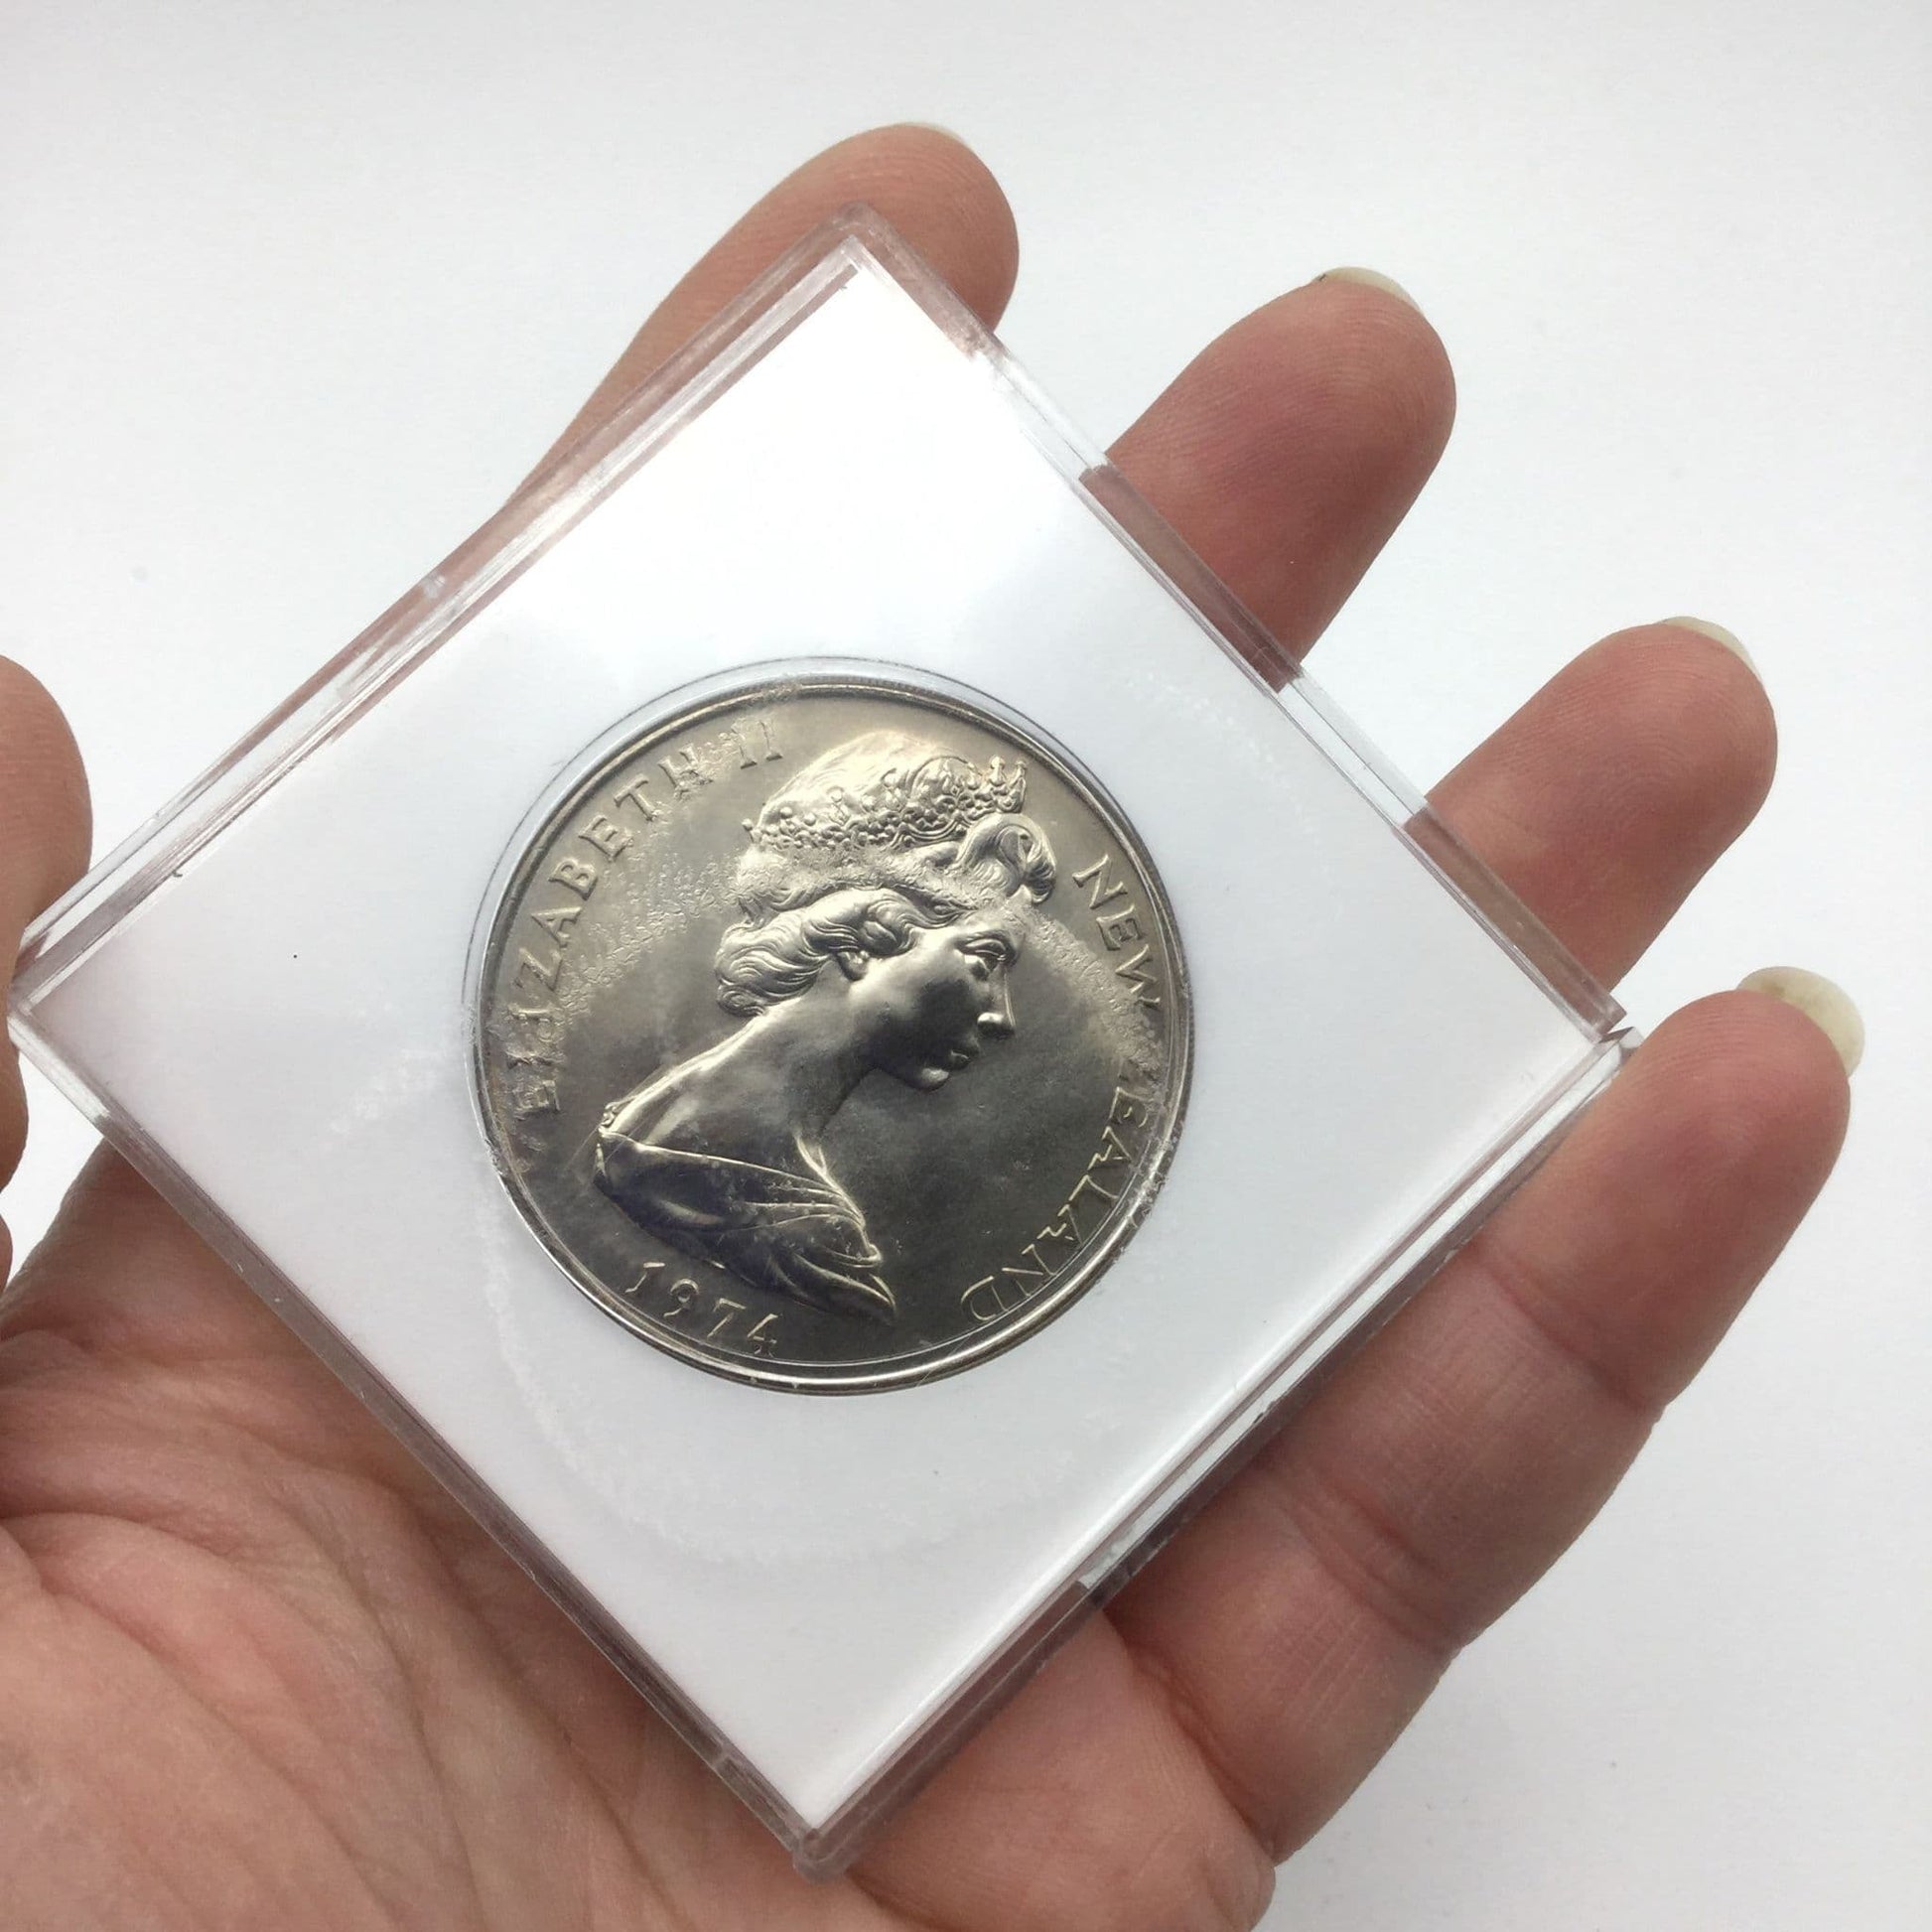 One dollar coin in a white case held in a hand